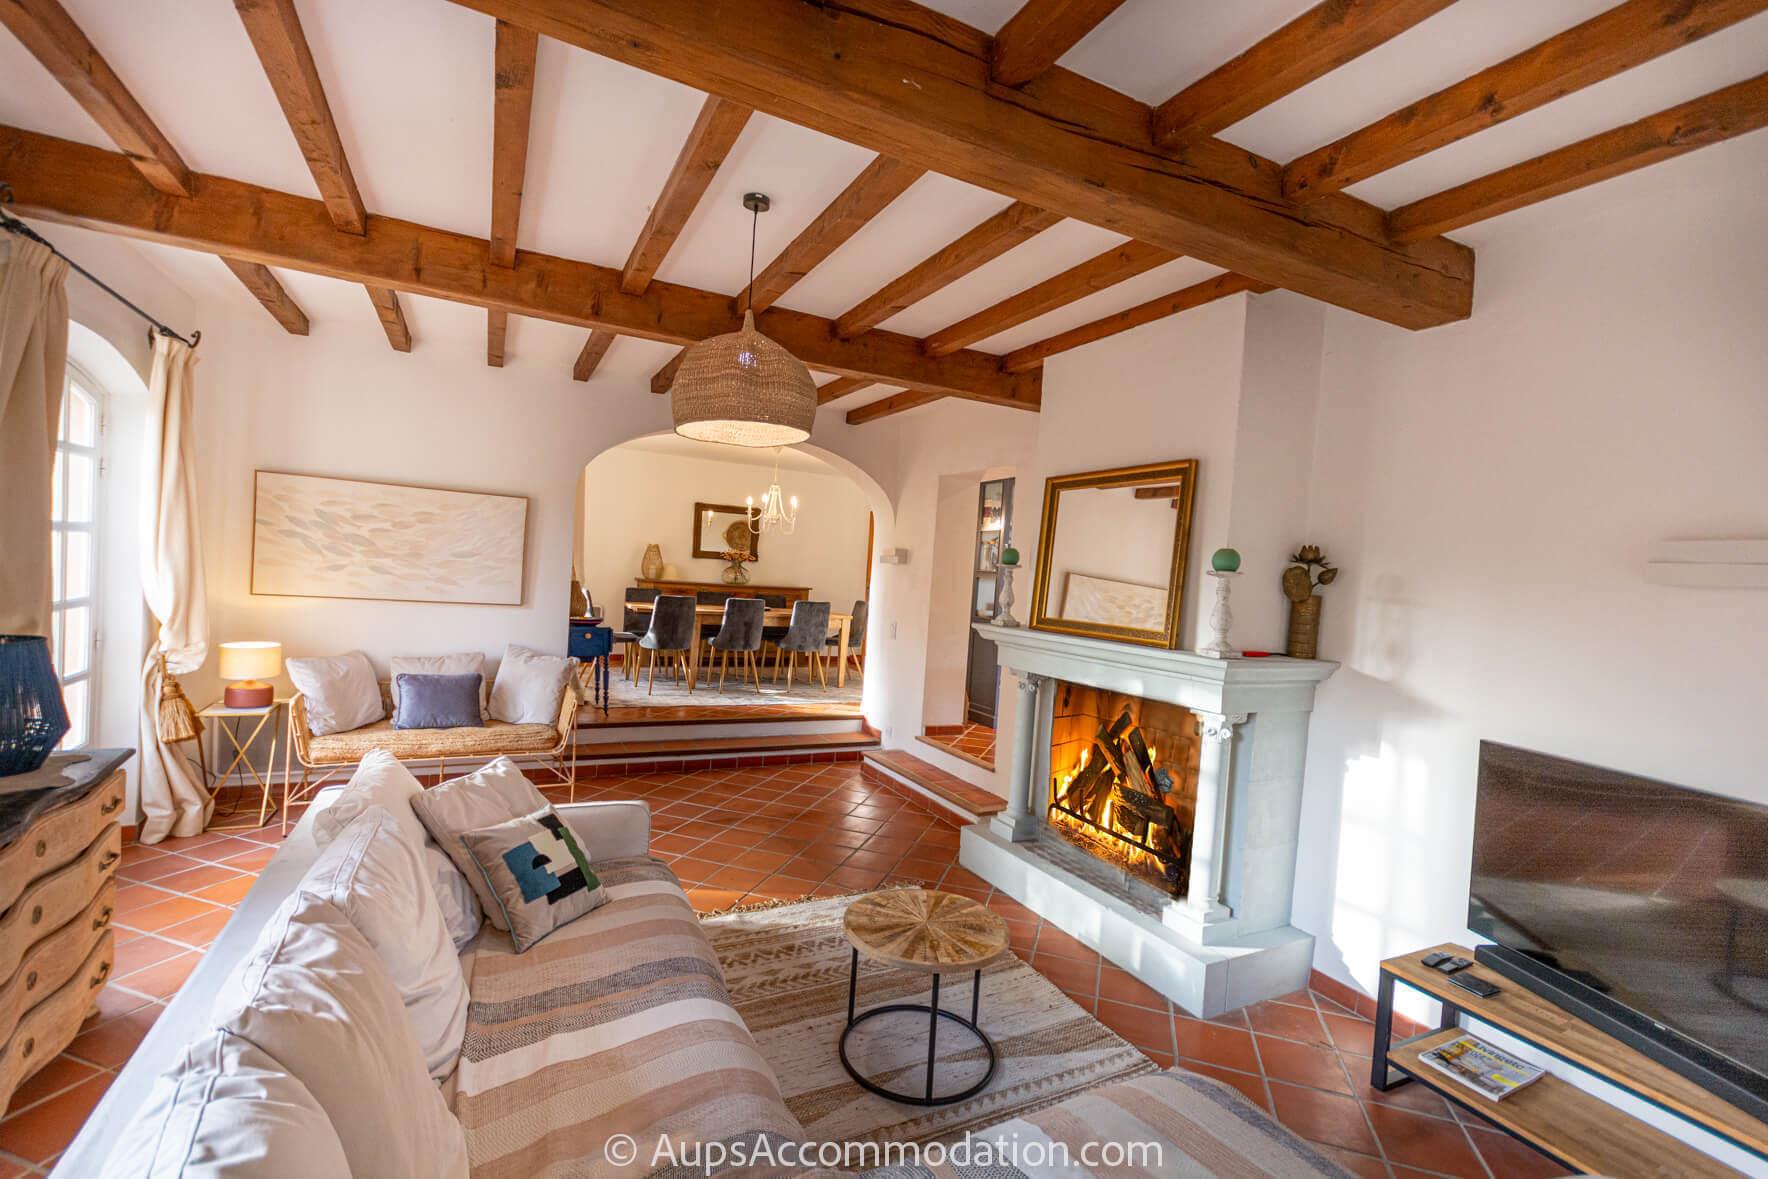 Le Mas Aups - Comfortable living area with log fire